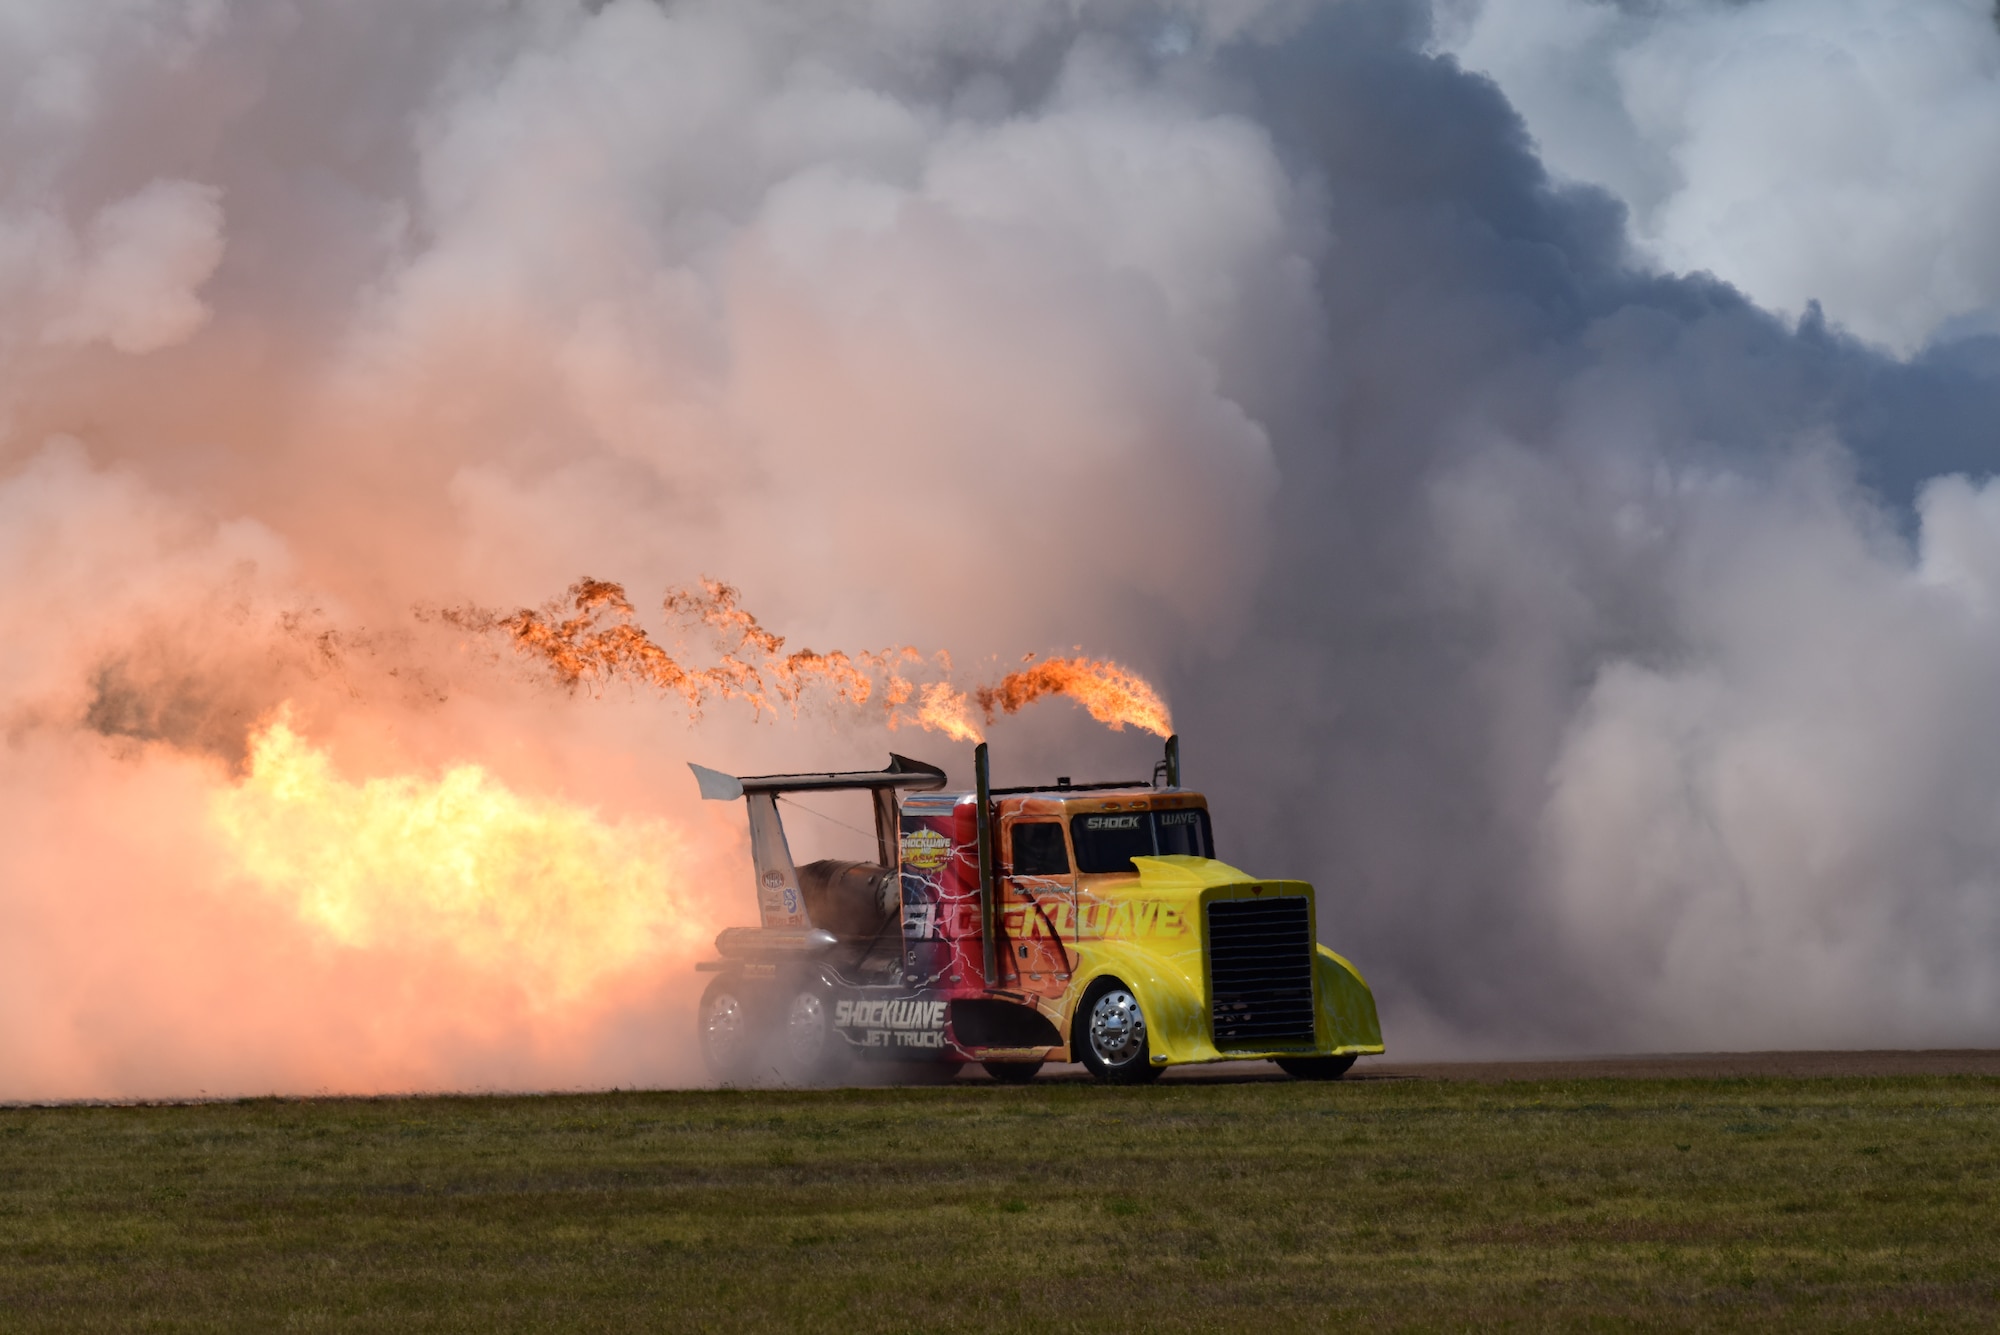 The “Shockwave” jet truck emerges from a cloud of smoke just before a 360-mile-an-hour pass down the runway at Laughlin’s Open House and Airshow, “Fiesta of Flight,” on Laughlin Air Force Base, Texas, May 12, 2018. Shockwave, along with 15 other performers put on a spectacle for more than 22,000 attendees at the airshow. (U.S. Air Force photo by Tech. Sgt. Mike Meares)